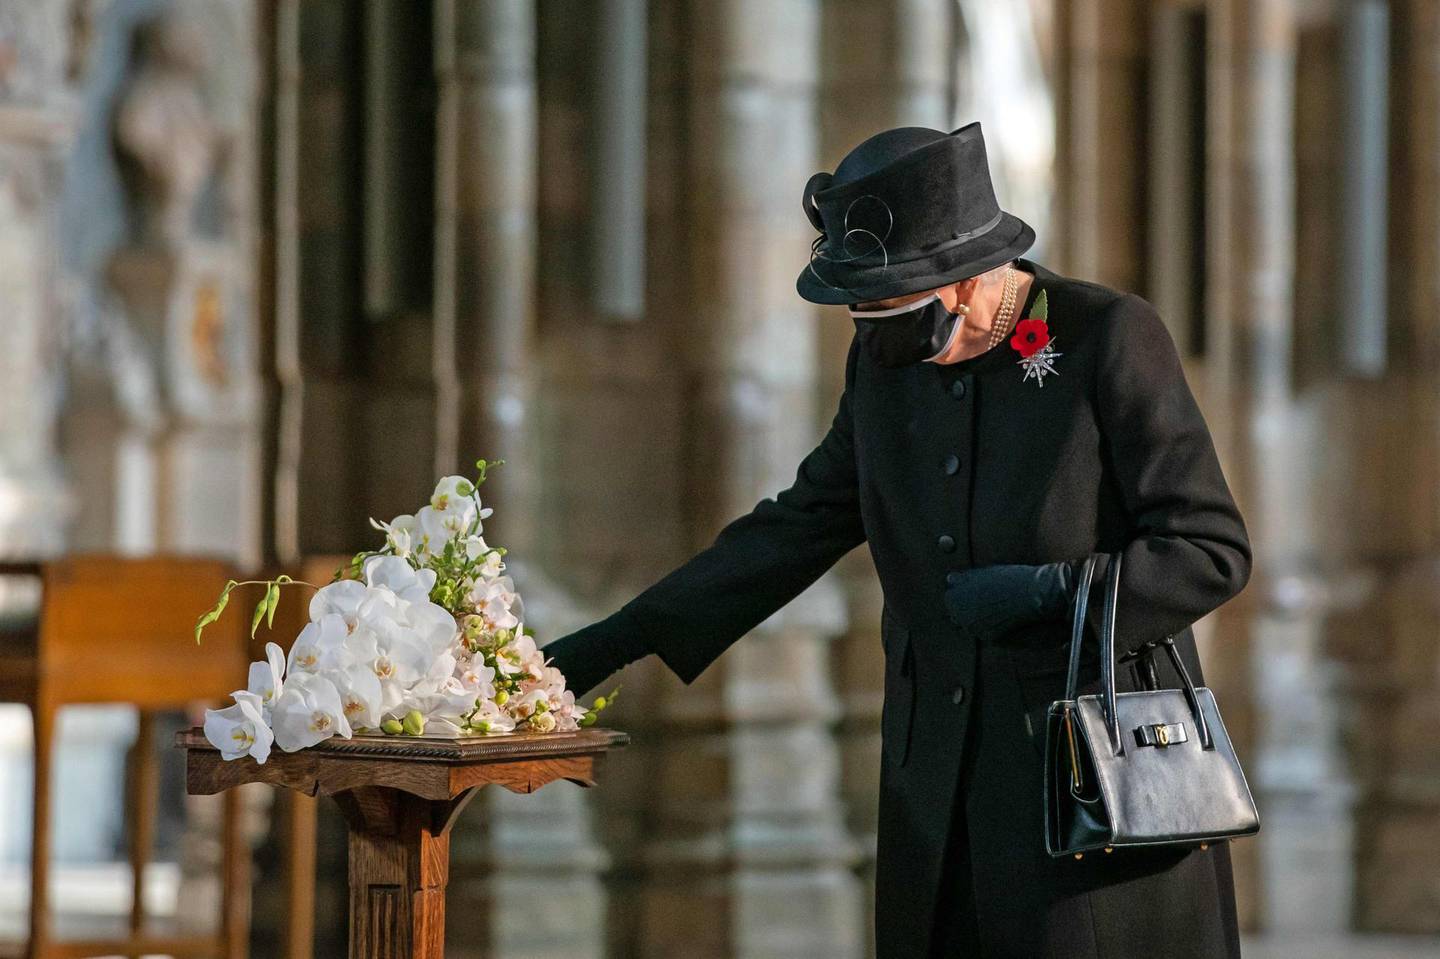 Britain's Queen Elizabeth II touches a bouquet of flowers to be layed at the grave of the Unknown Warrior to mark the centenary of the burial of the Unknown Warrior ahead of Remembrance Sunday at Westminster Abbey in London on November 4, 2020.  In the small private ceremony, The Queen honoured the Unknown Warrior and the Royal Family’s own associations with the First World War and the grave at Westminster Abbey.
As part of the ceremony, a bouquet of flowers featuring orchids and myrtle - based on Her Majesty’s own wedding bouquet from 1947 - was placed on the grave of the Unknown Warrior in an act of remembrance. The gesture reflected the custom of Royal bridal bouquets being placed on the grave, a tradition which began in 1923 when Lady Elizabeth Bowes-Lyon, the future Queen Elizabeth The Queen Mother, laid her bouquet as she entered the Abbey in memory of her brother Fergus, who was killed at the Battle of Loos in 1915.
The grave of the Unknown Warrior is the final resting place of an unidentified British serviceman who died on the battlefields during the First World War. The serviceman’s body was brought from Northern France and buried at Westminster Abbey on 11th November 1920 after a procession through Whitehall.  / AFP / POOL / PA WIRE / Aaron Chown
